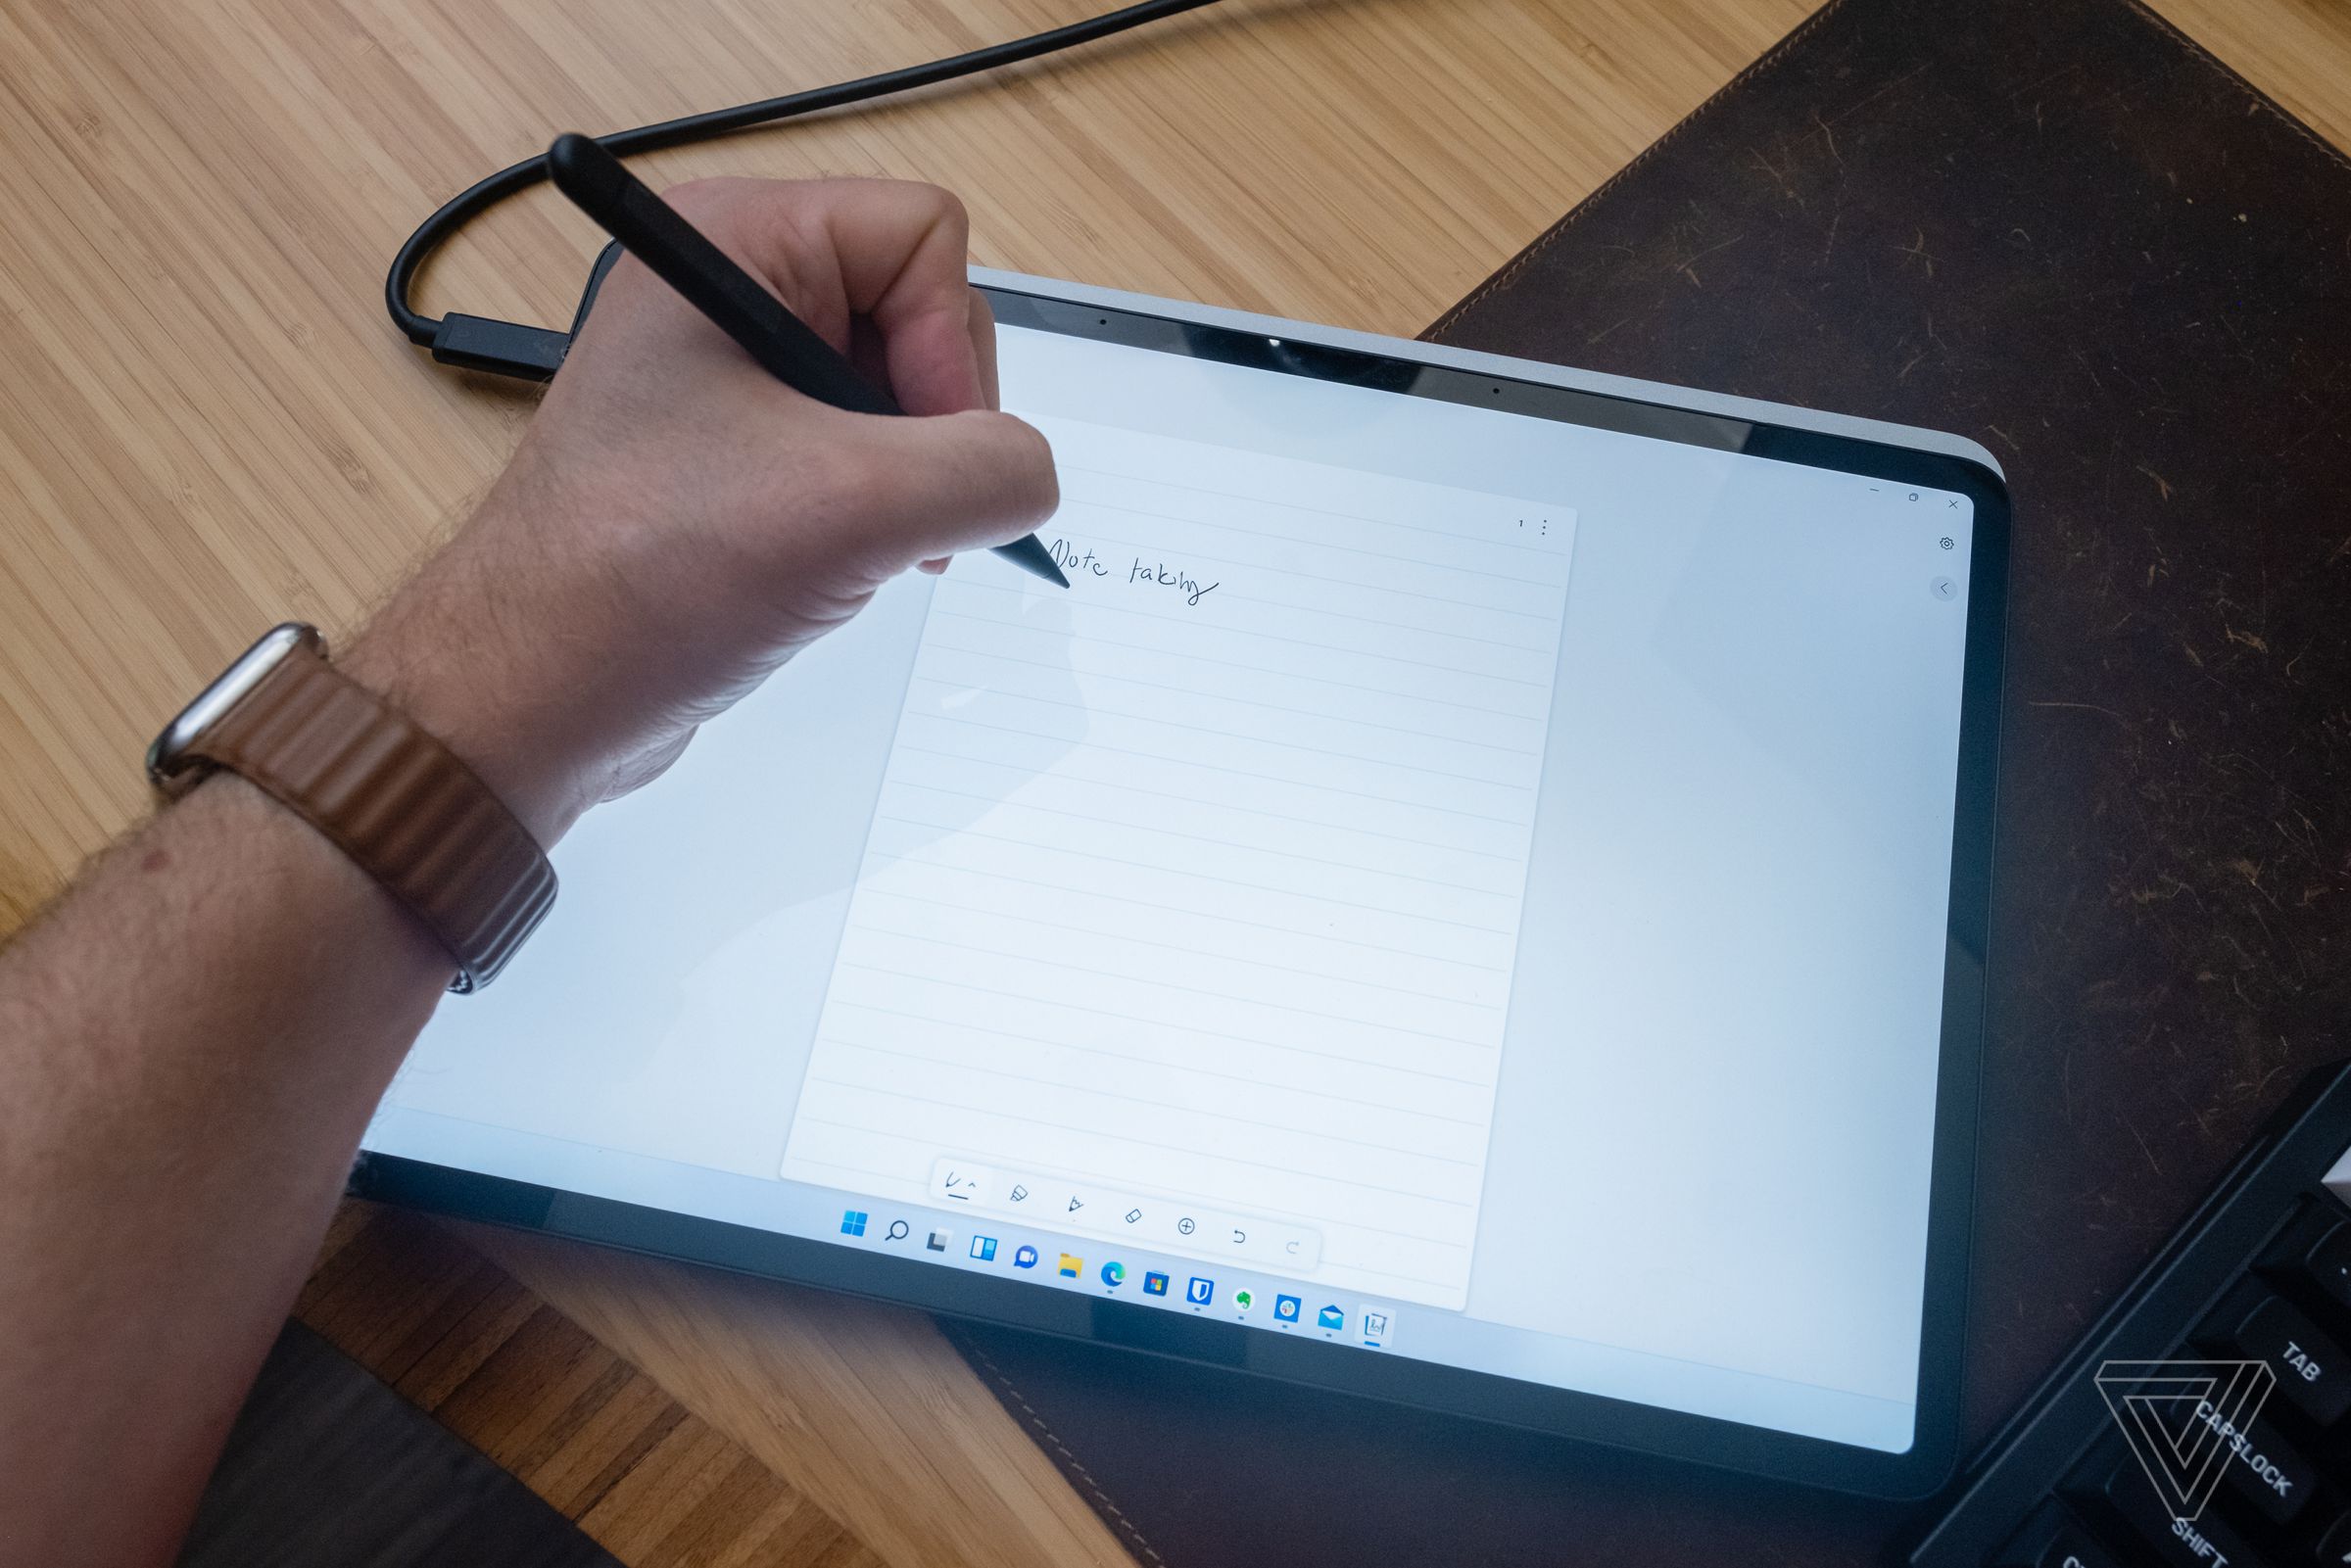 The flat position of the screen is ideal for note taking or drawing with the Surface Pen.